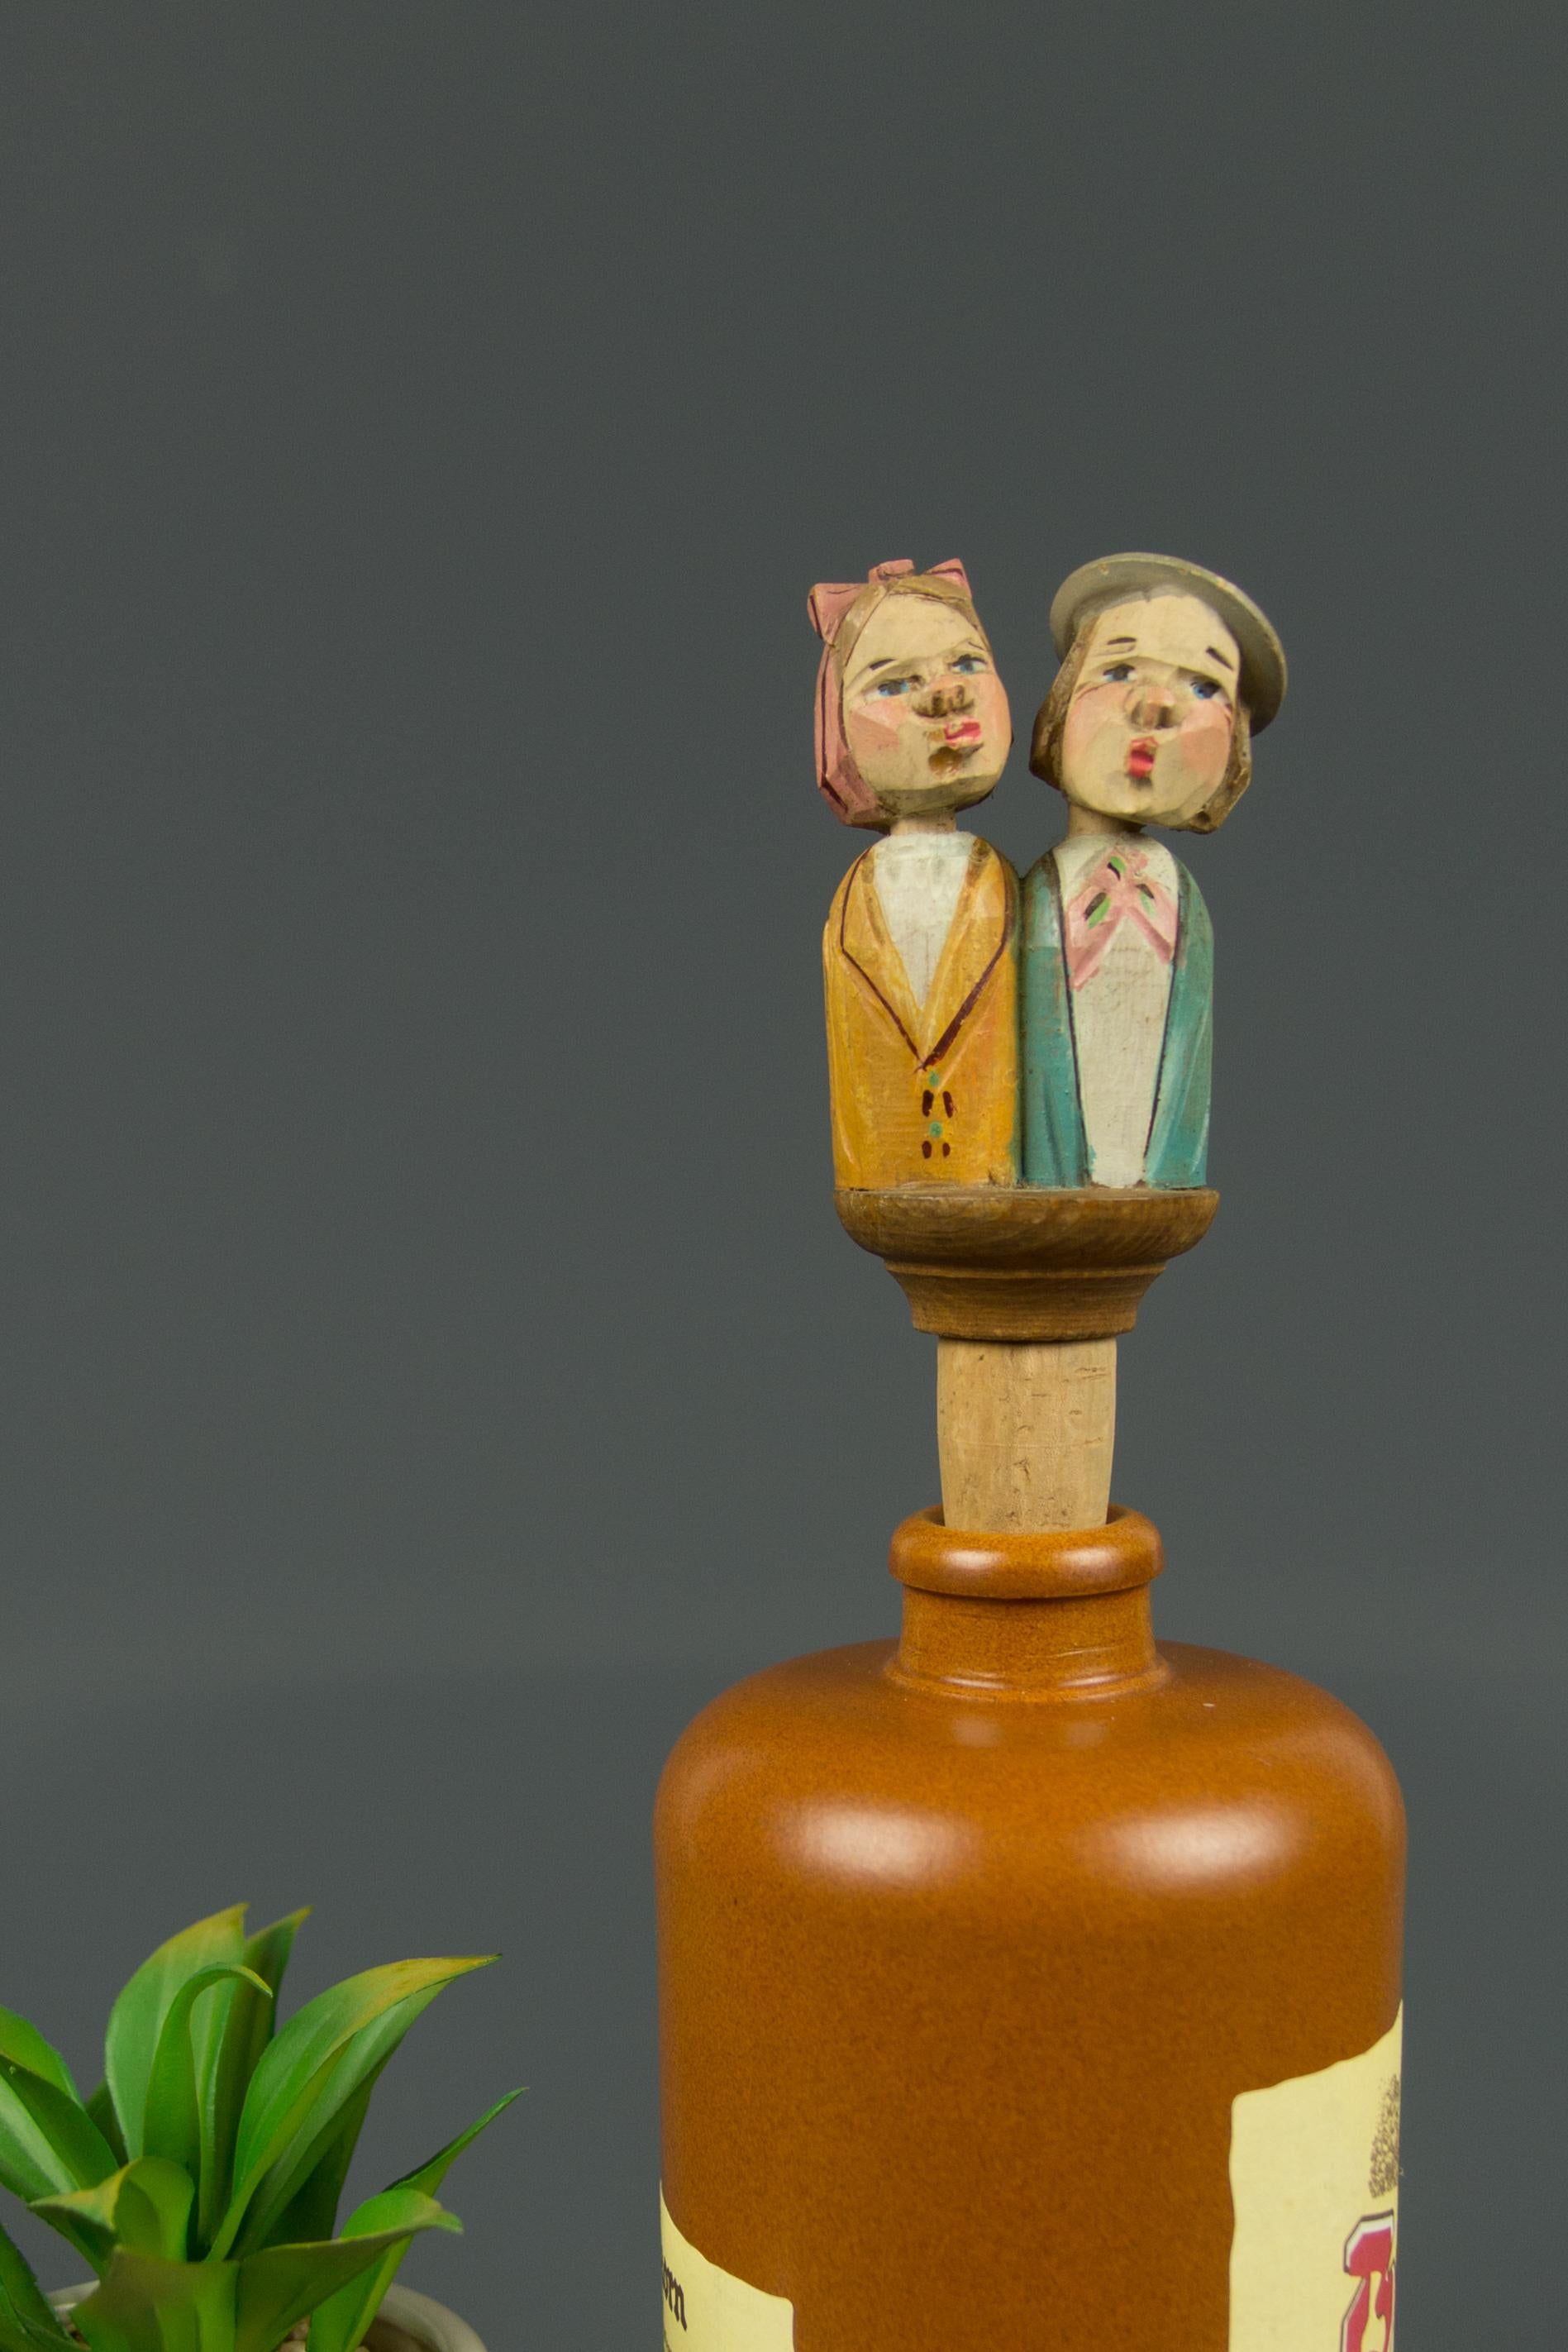 Adorable hand carved and hand painted mechanical bottle stopper. It depicts a lovely couple from the 1950s. There is a wooden lever on the back of the couple and when it is pulled down, the couple raises their heads and turns towards each other to